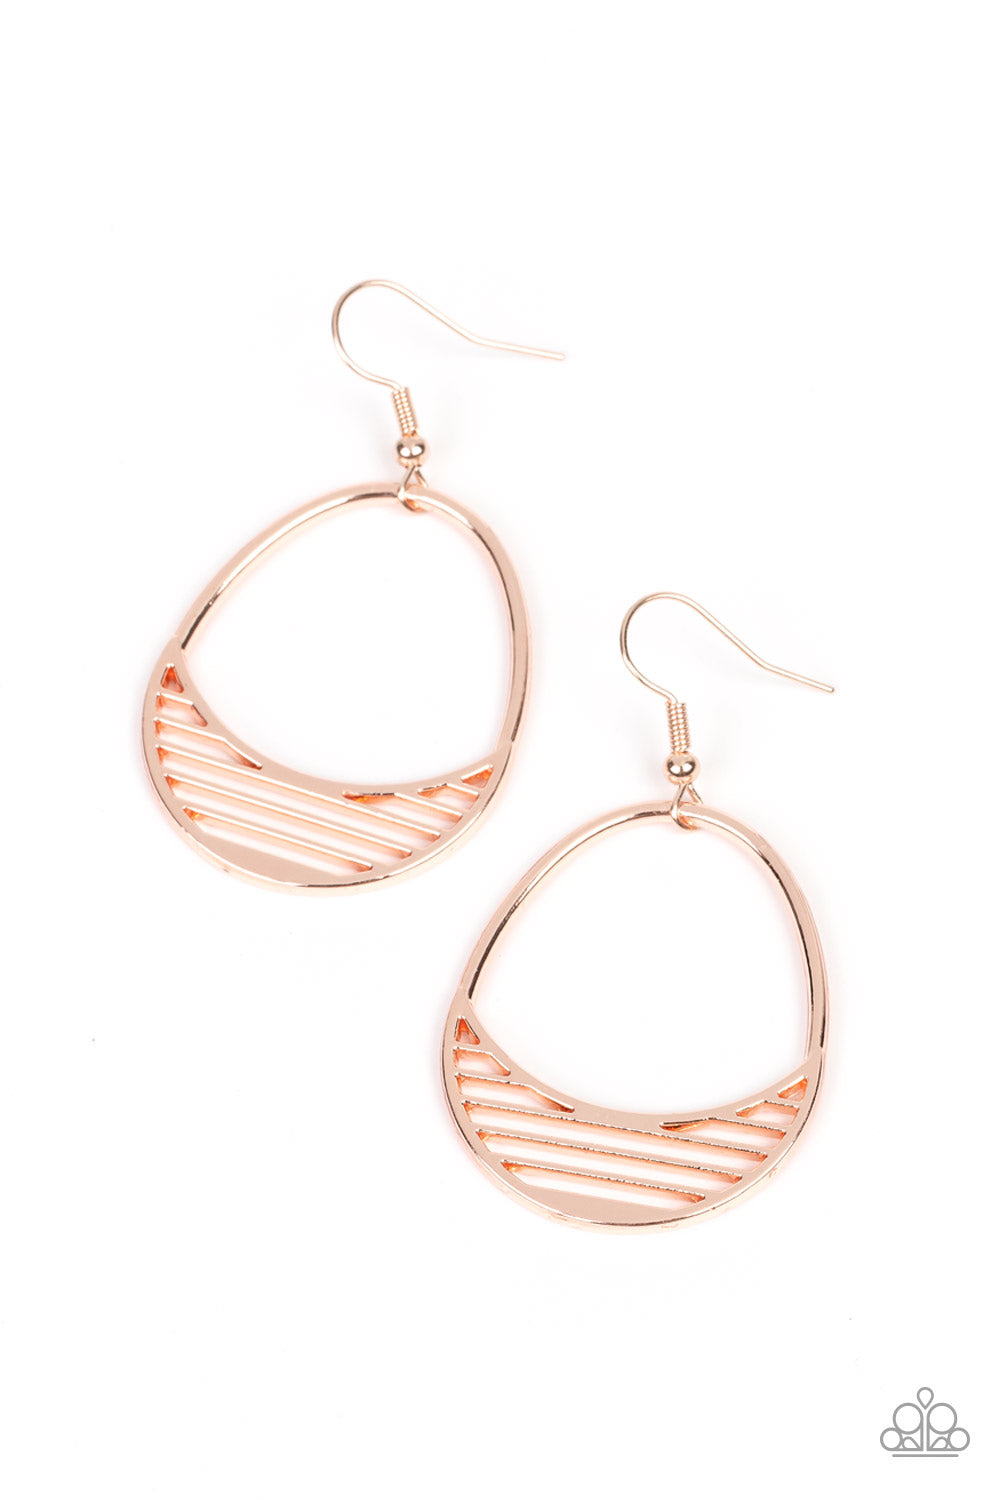 Paparazzi Accessories - Segmented Shimmer - Rose Gold Earrings layers of shiny rose gold bars create shafts of light at the bottom of an airy oval frame, creating segments of shimmer. Earring attaches to a standard fishhook fitting.  Sold as one pair of earrings.